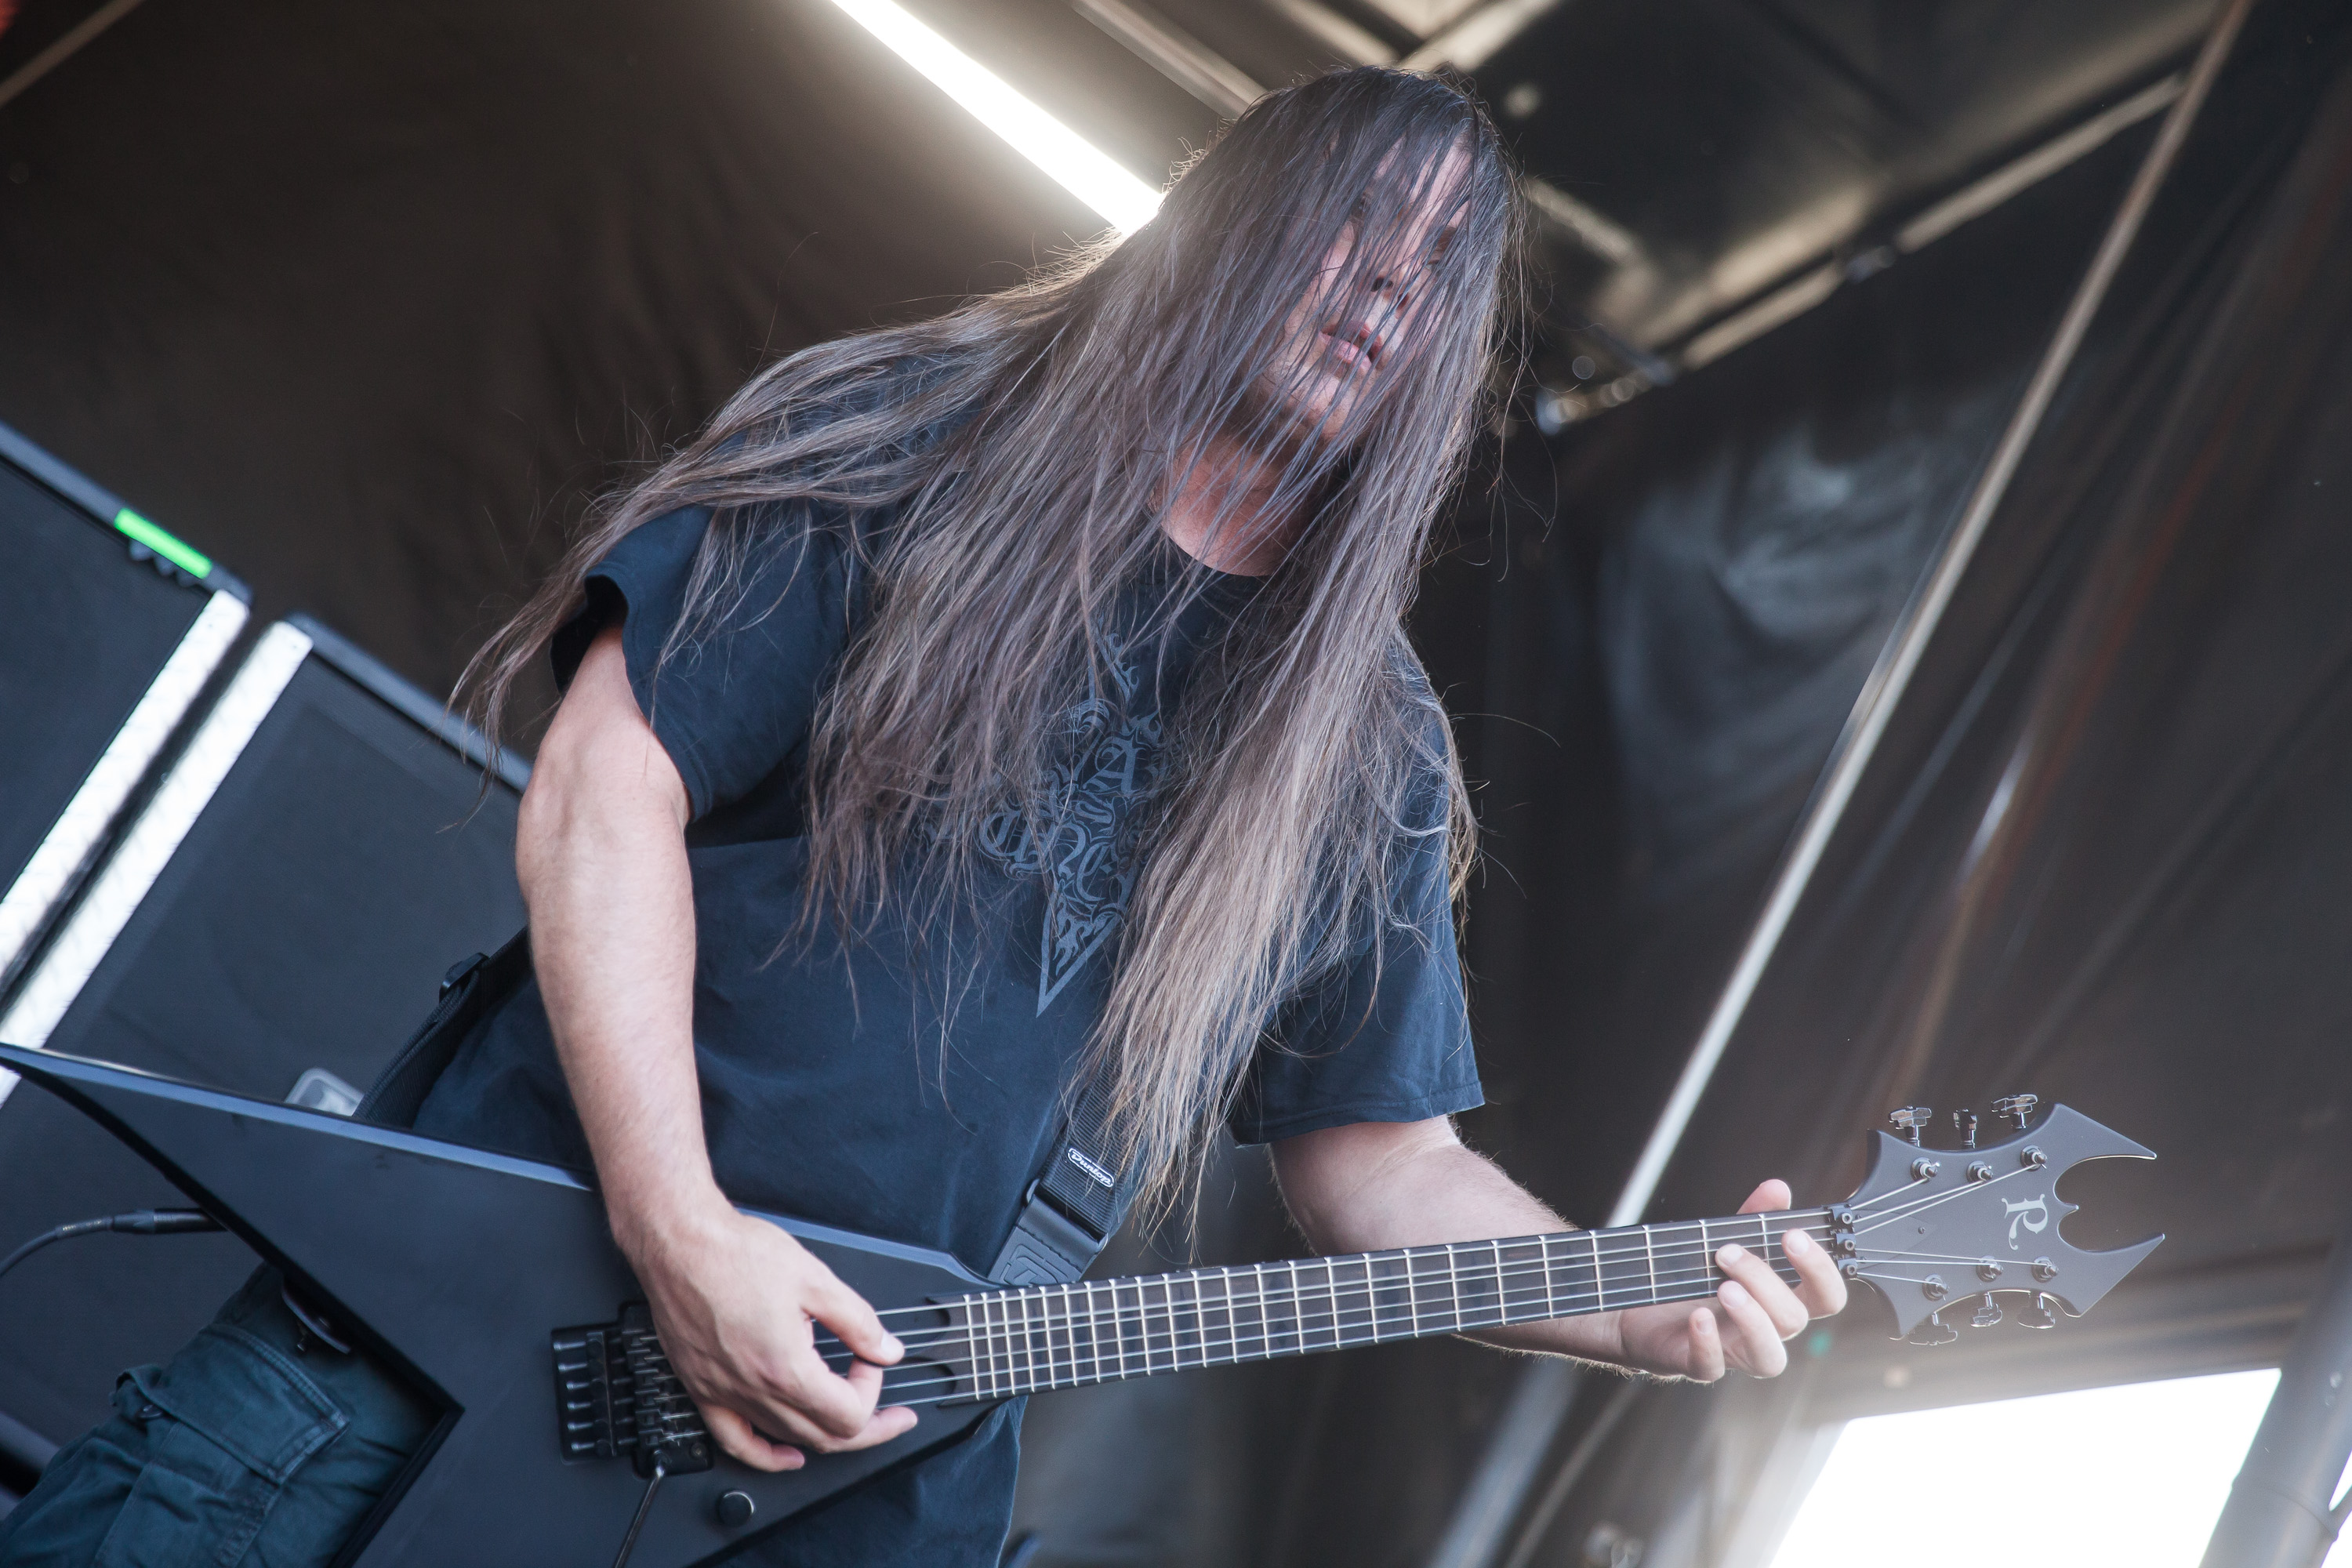 Cannibal Corpse Guitarist Tased and Arrested After Allegedly Charging Deputy With Knife